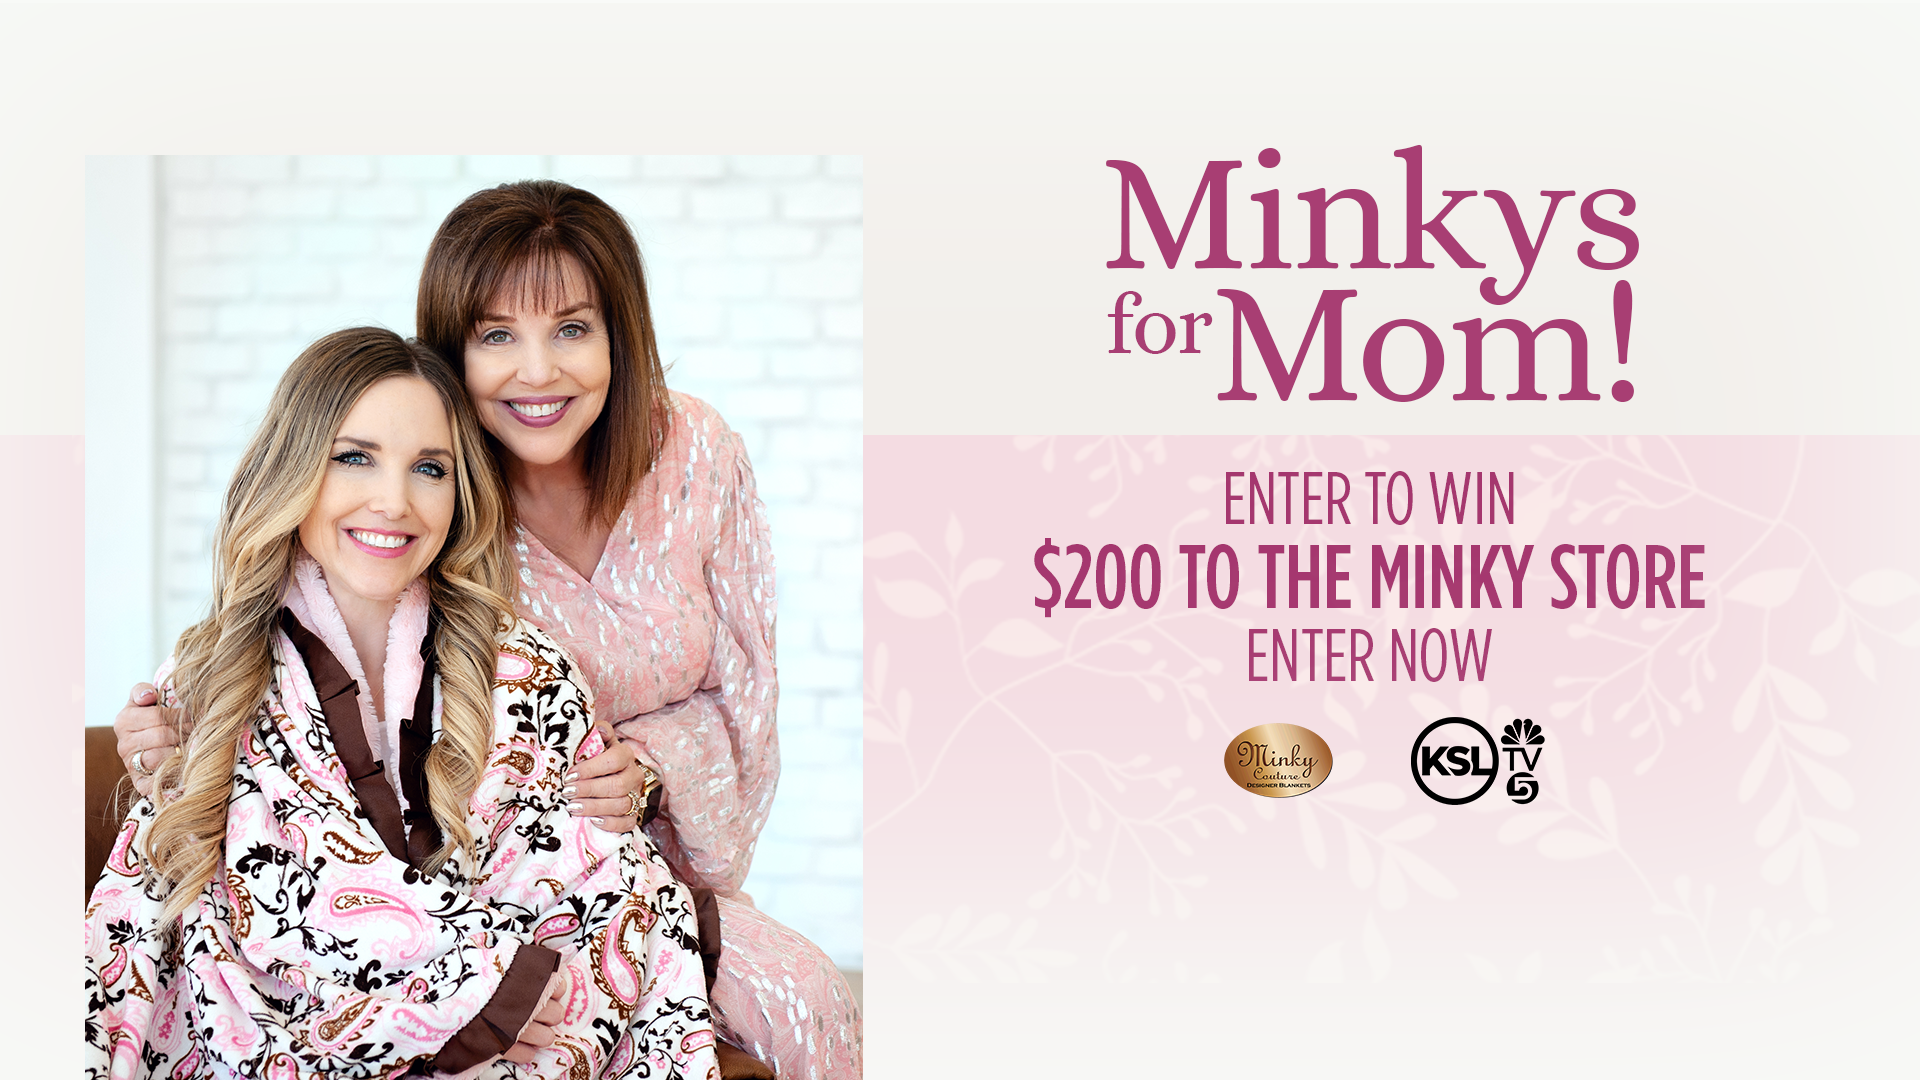 Win a Minky for Mom!